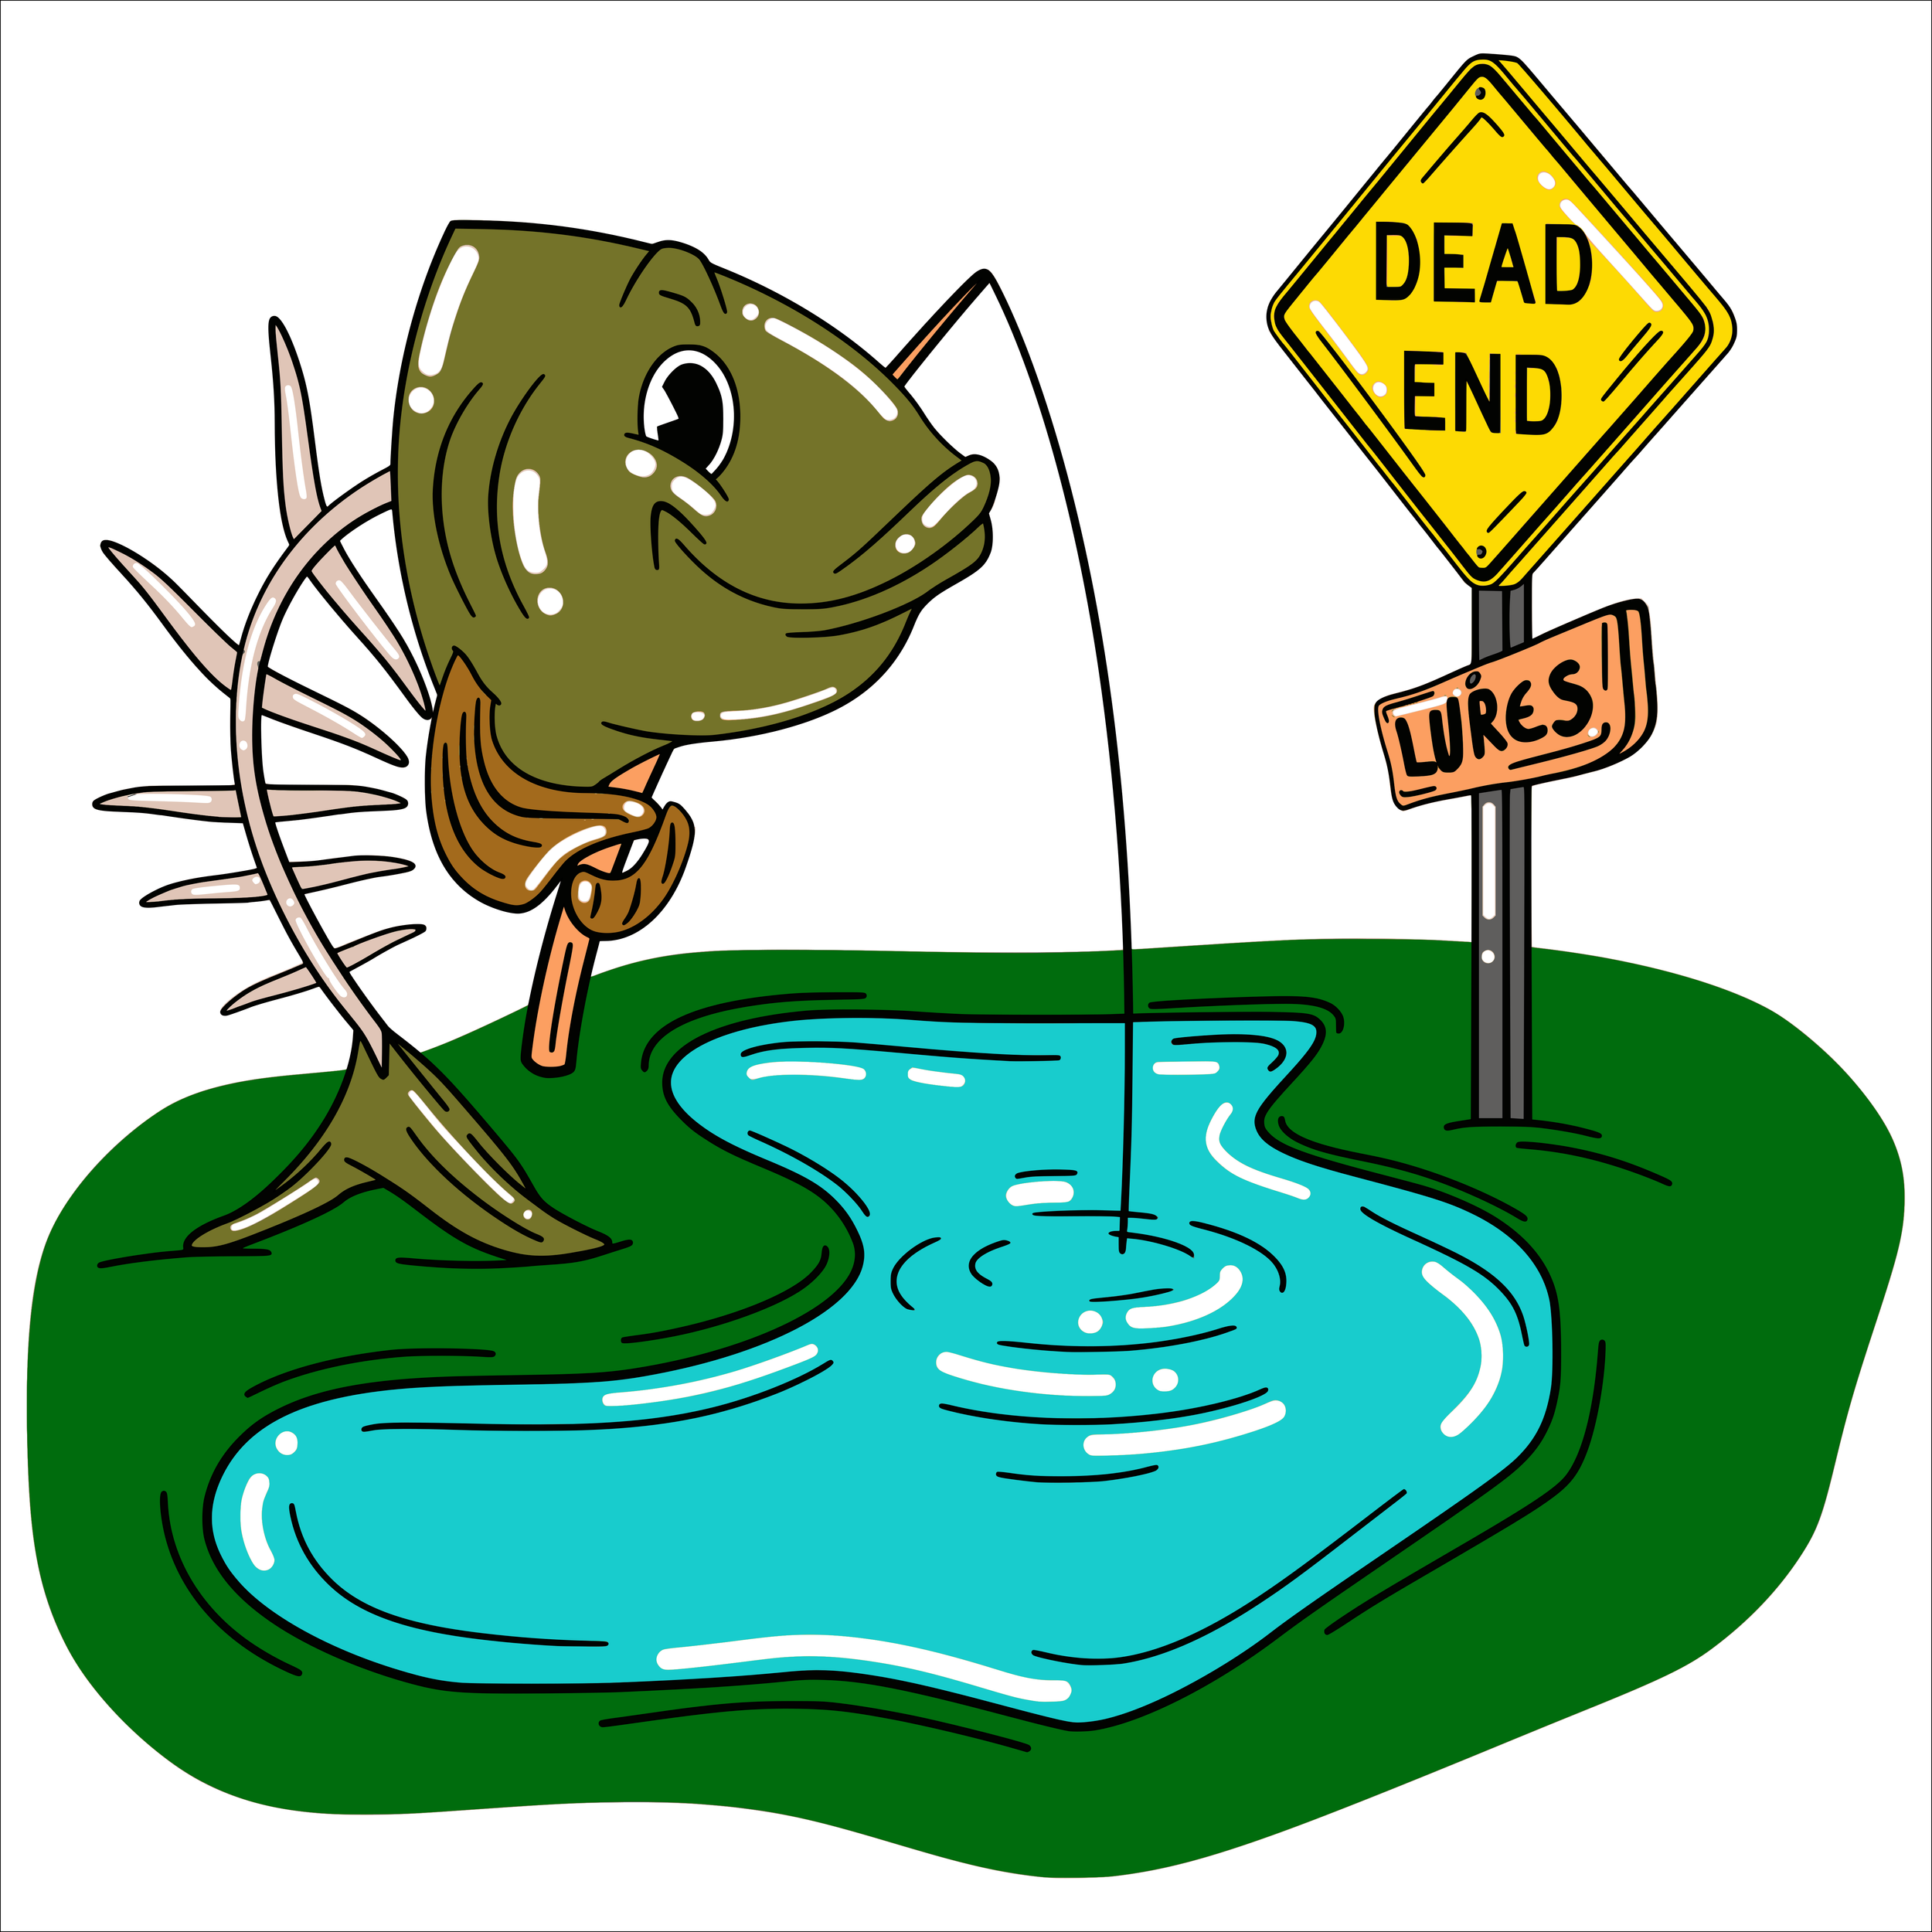 BLOG  FISHING TIPS, NEWS & MORE — DEAD END LURES